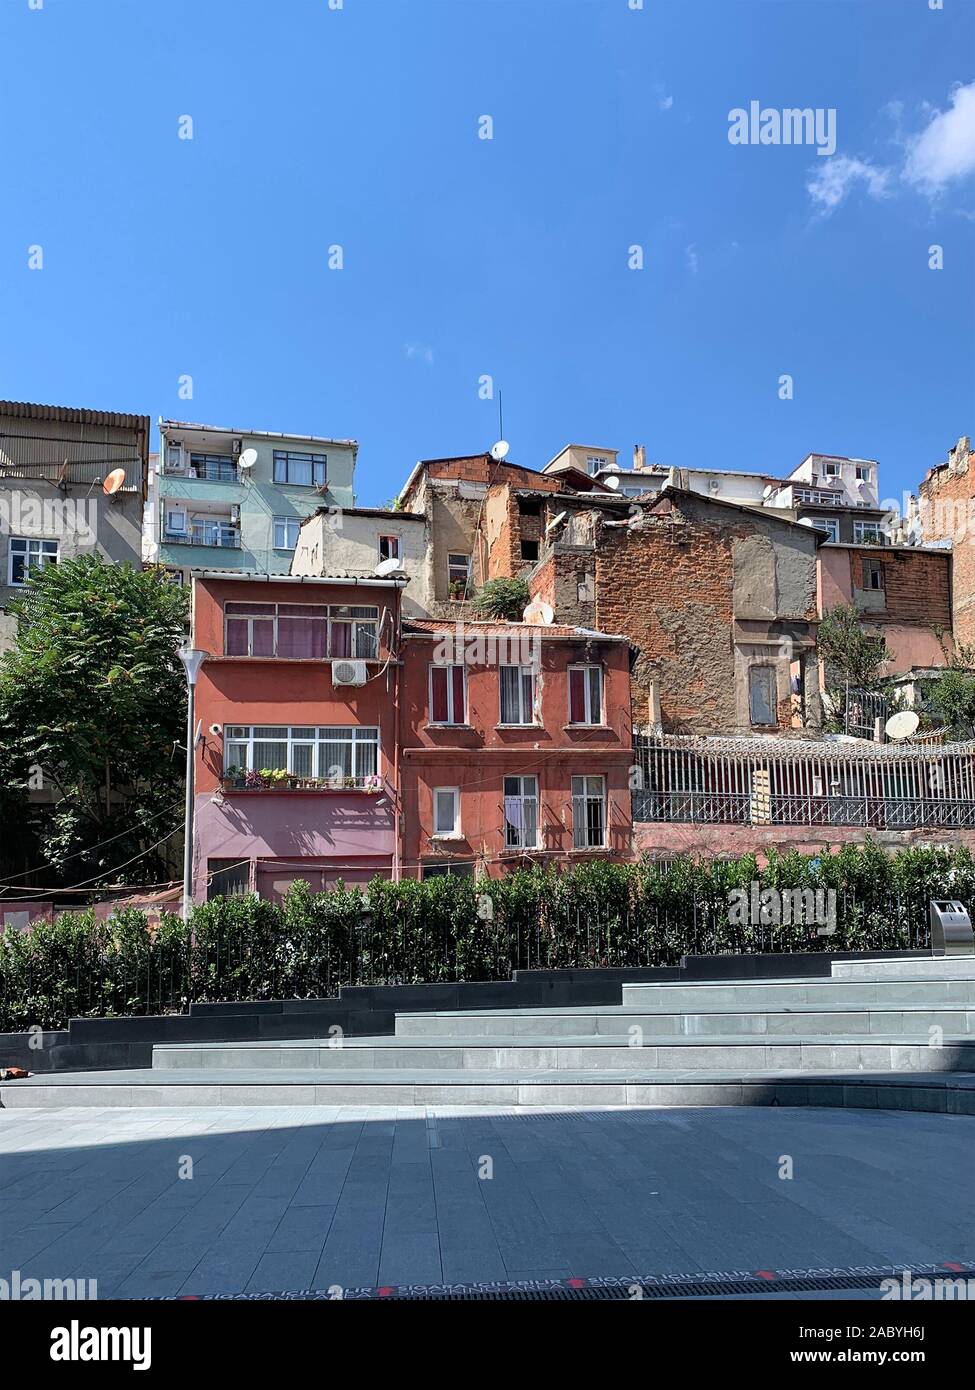 View of old buildings in Dolapdere area of Istanbul. It is a sunny summer day. Stock Photo